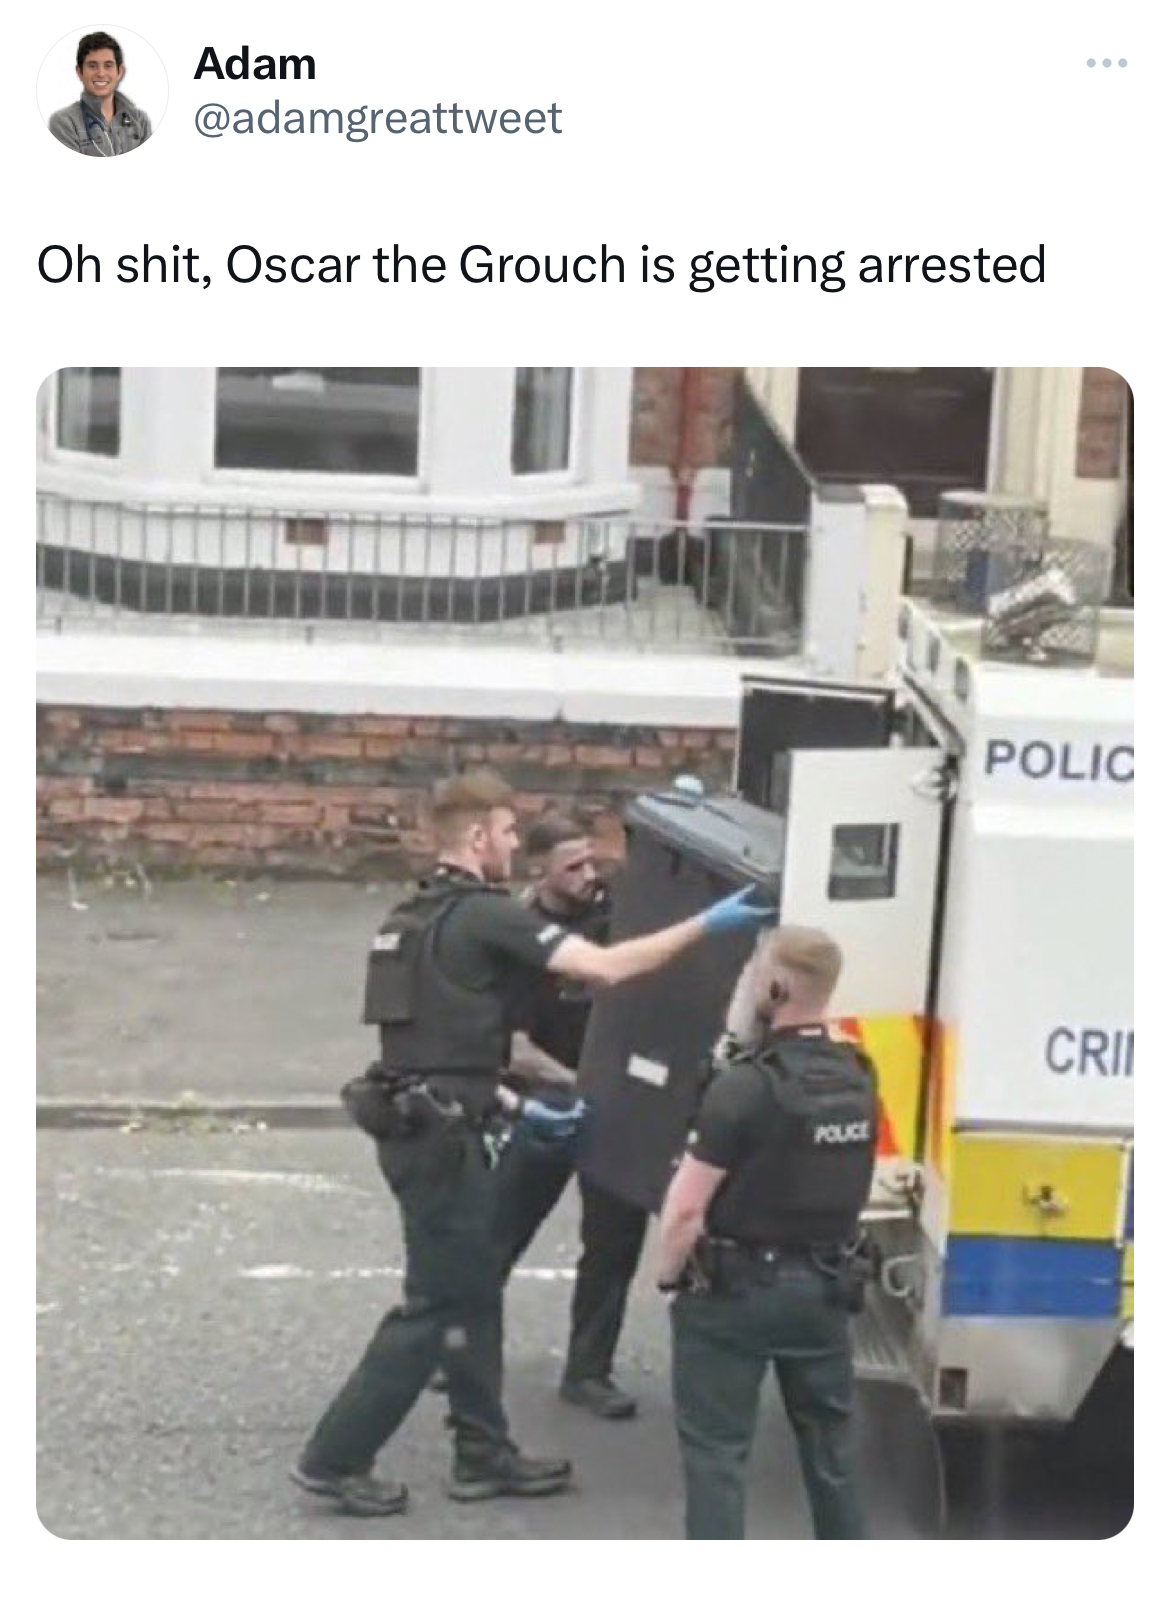 savage tweets - security - Adam Oh shit, Oscar the Grouch is getting arrested Police Polic Cri